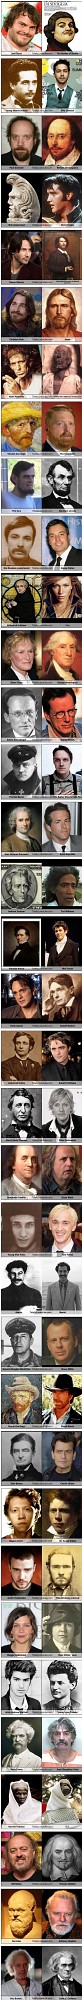 People from history vs. Celebrities